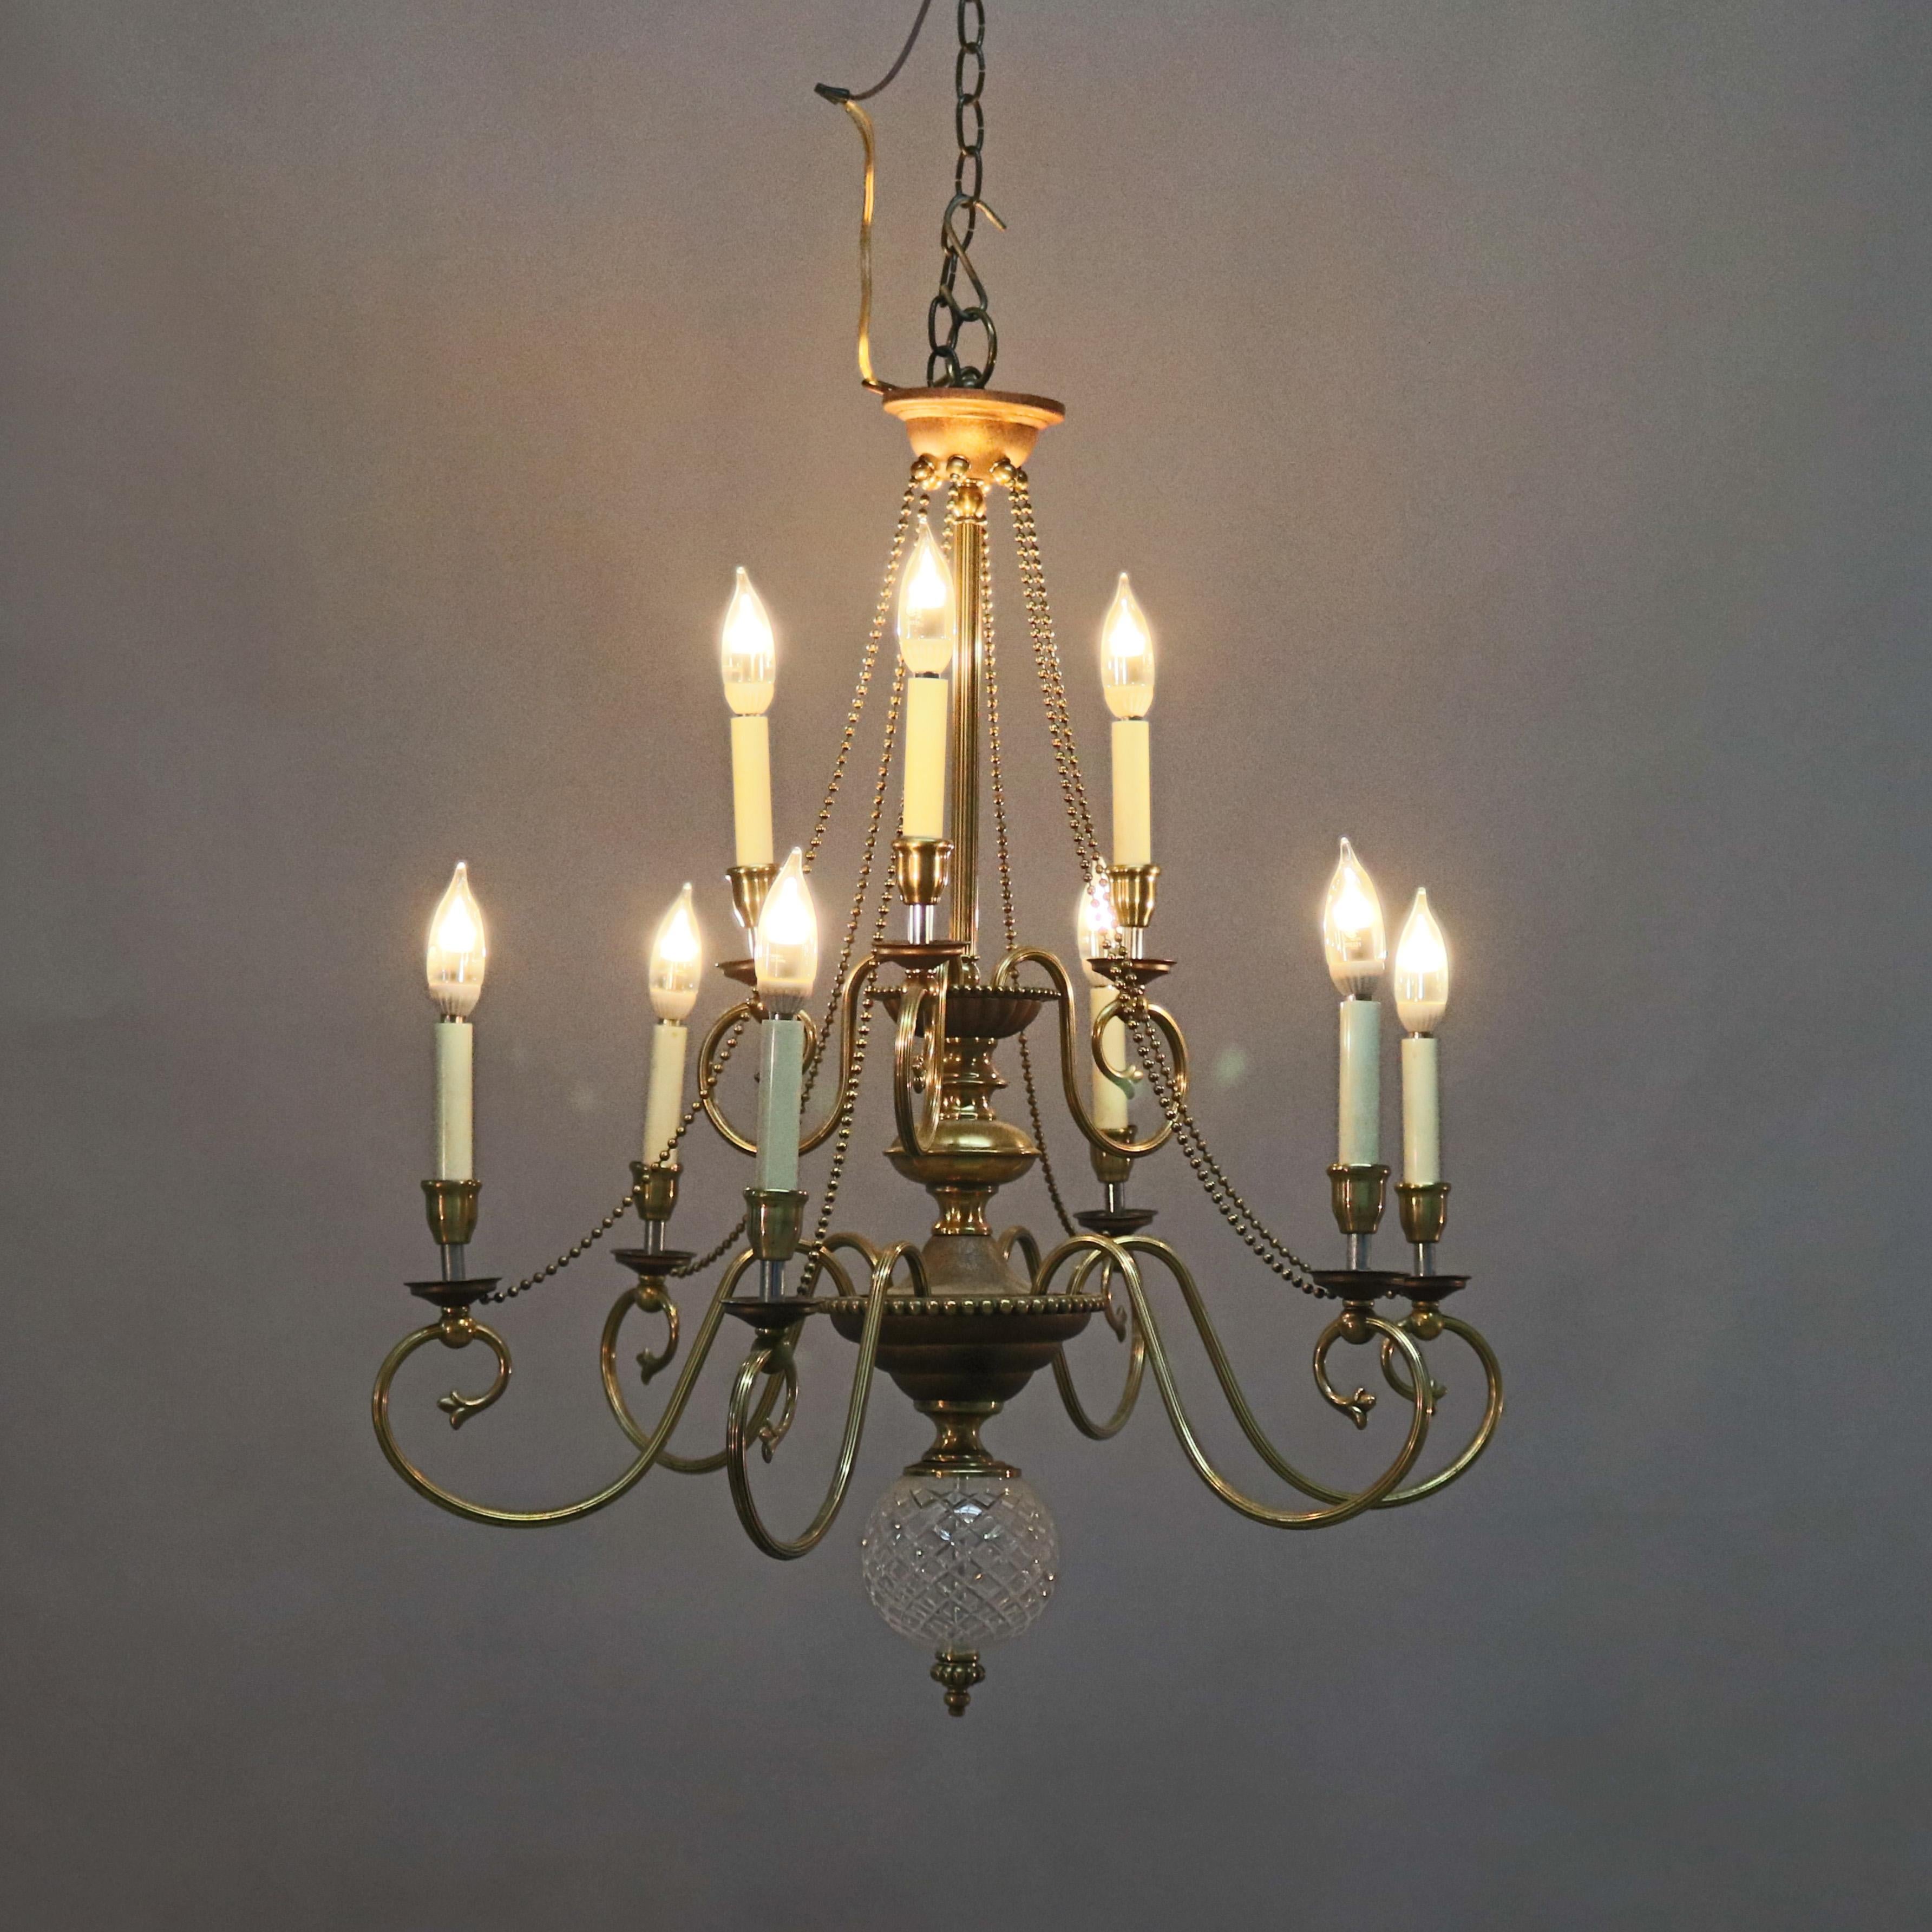 Cast Vintage French Nine-Light Tiered Brass and Crystal Chandelier, 20th Century For Sale